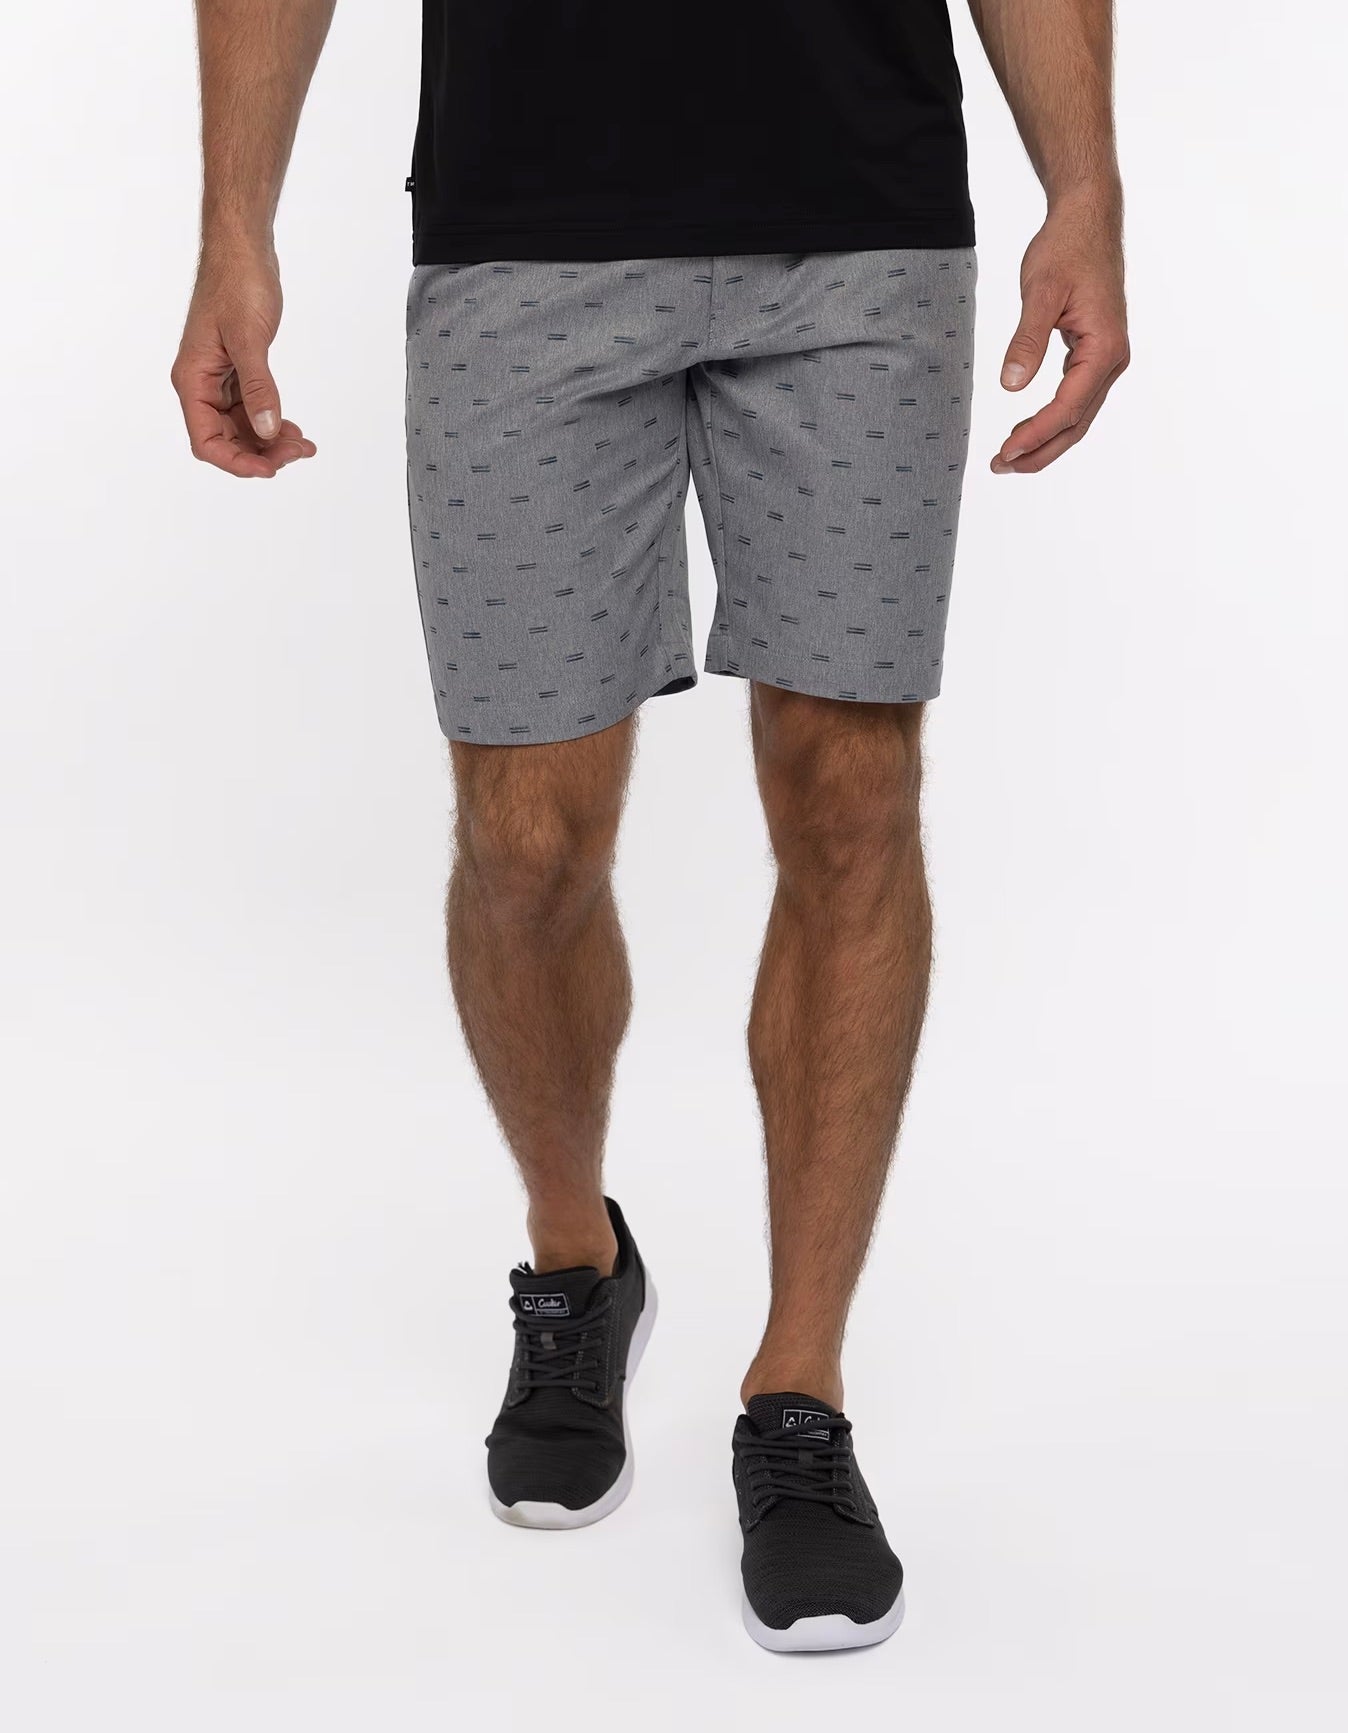 Comfort and style intersect in the SOUTHERN BORDER short. With a two-color geo print, and fabric equipped with both 4-way stretch and quick-drying properties, discover a look and feel you’ll love.